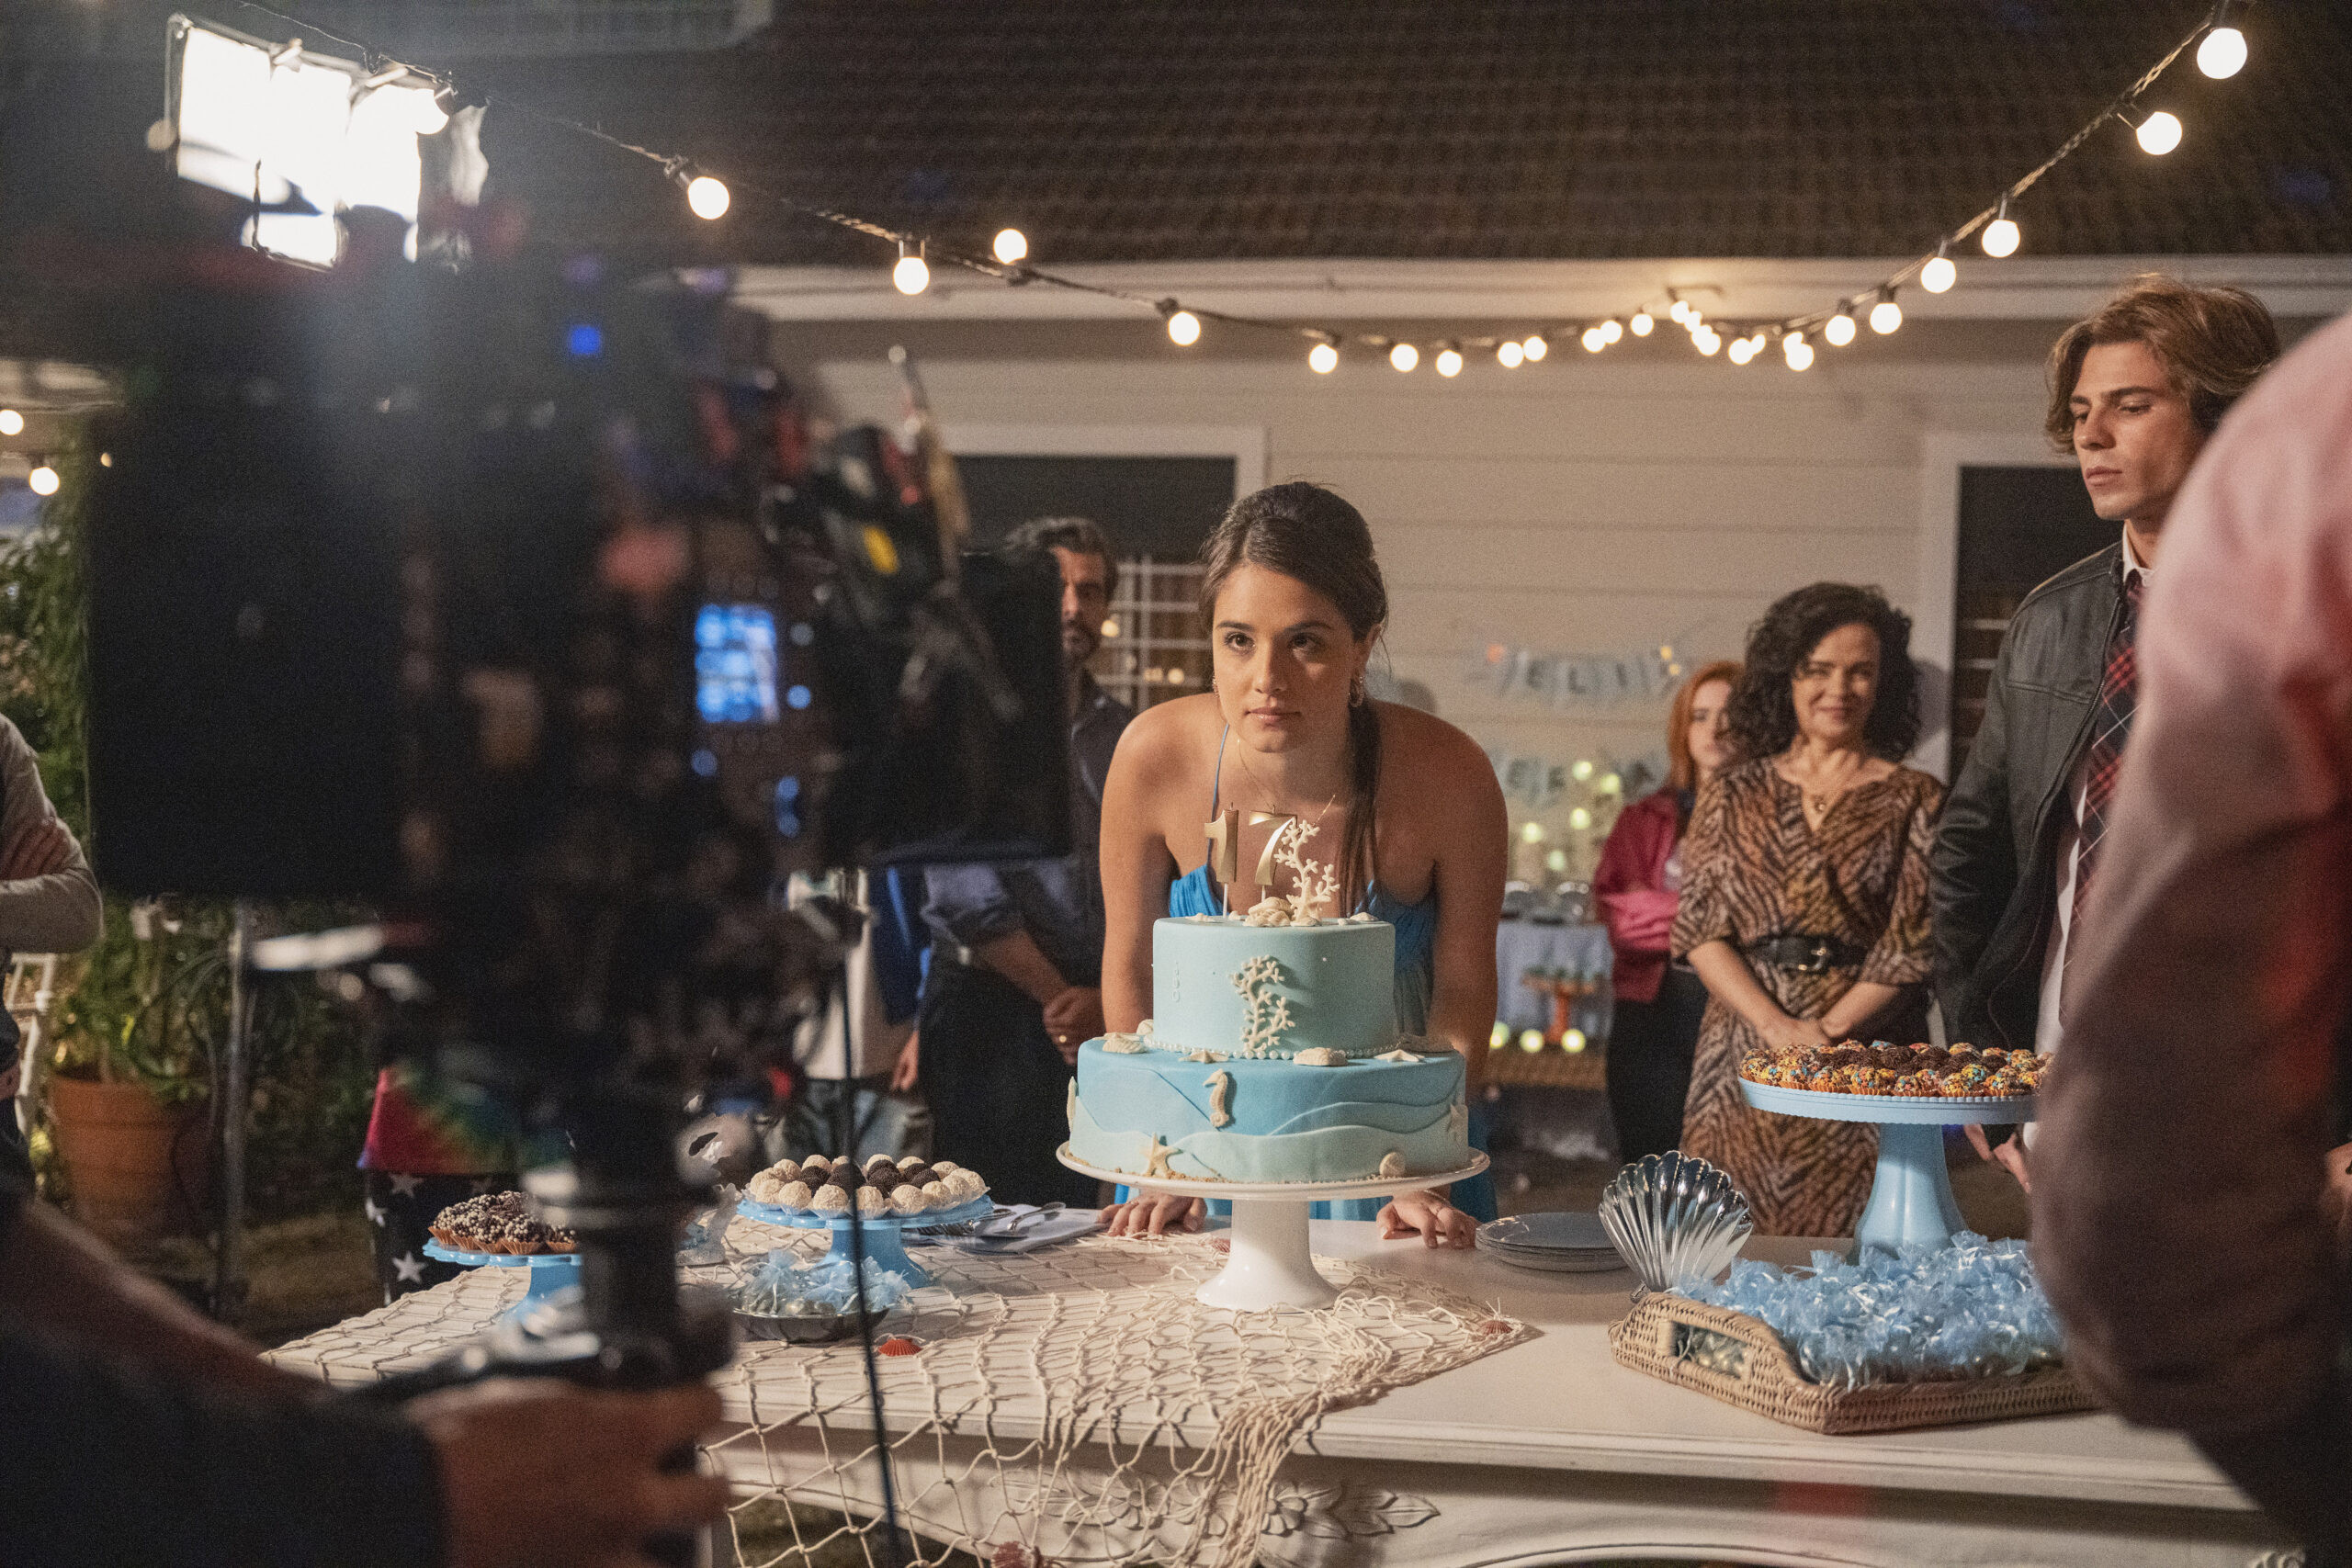 Amanda Azevedo on the set of Back to 15 with a blue cake in front of her.